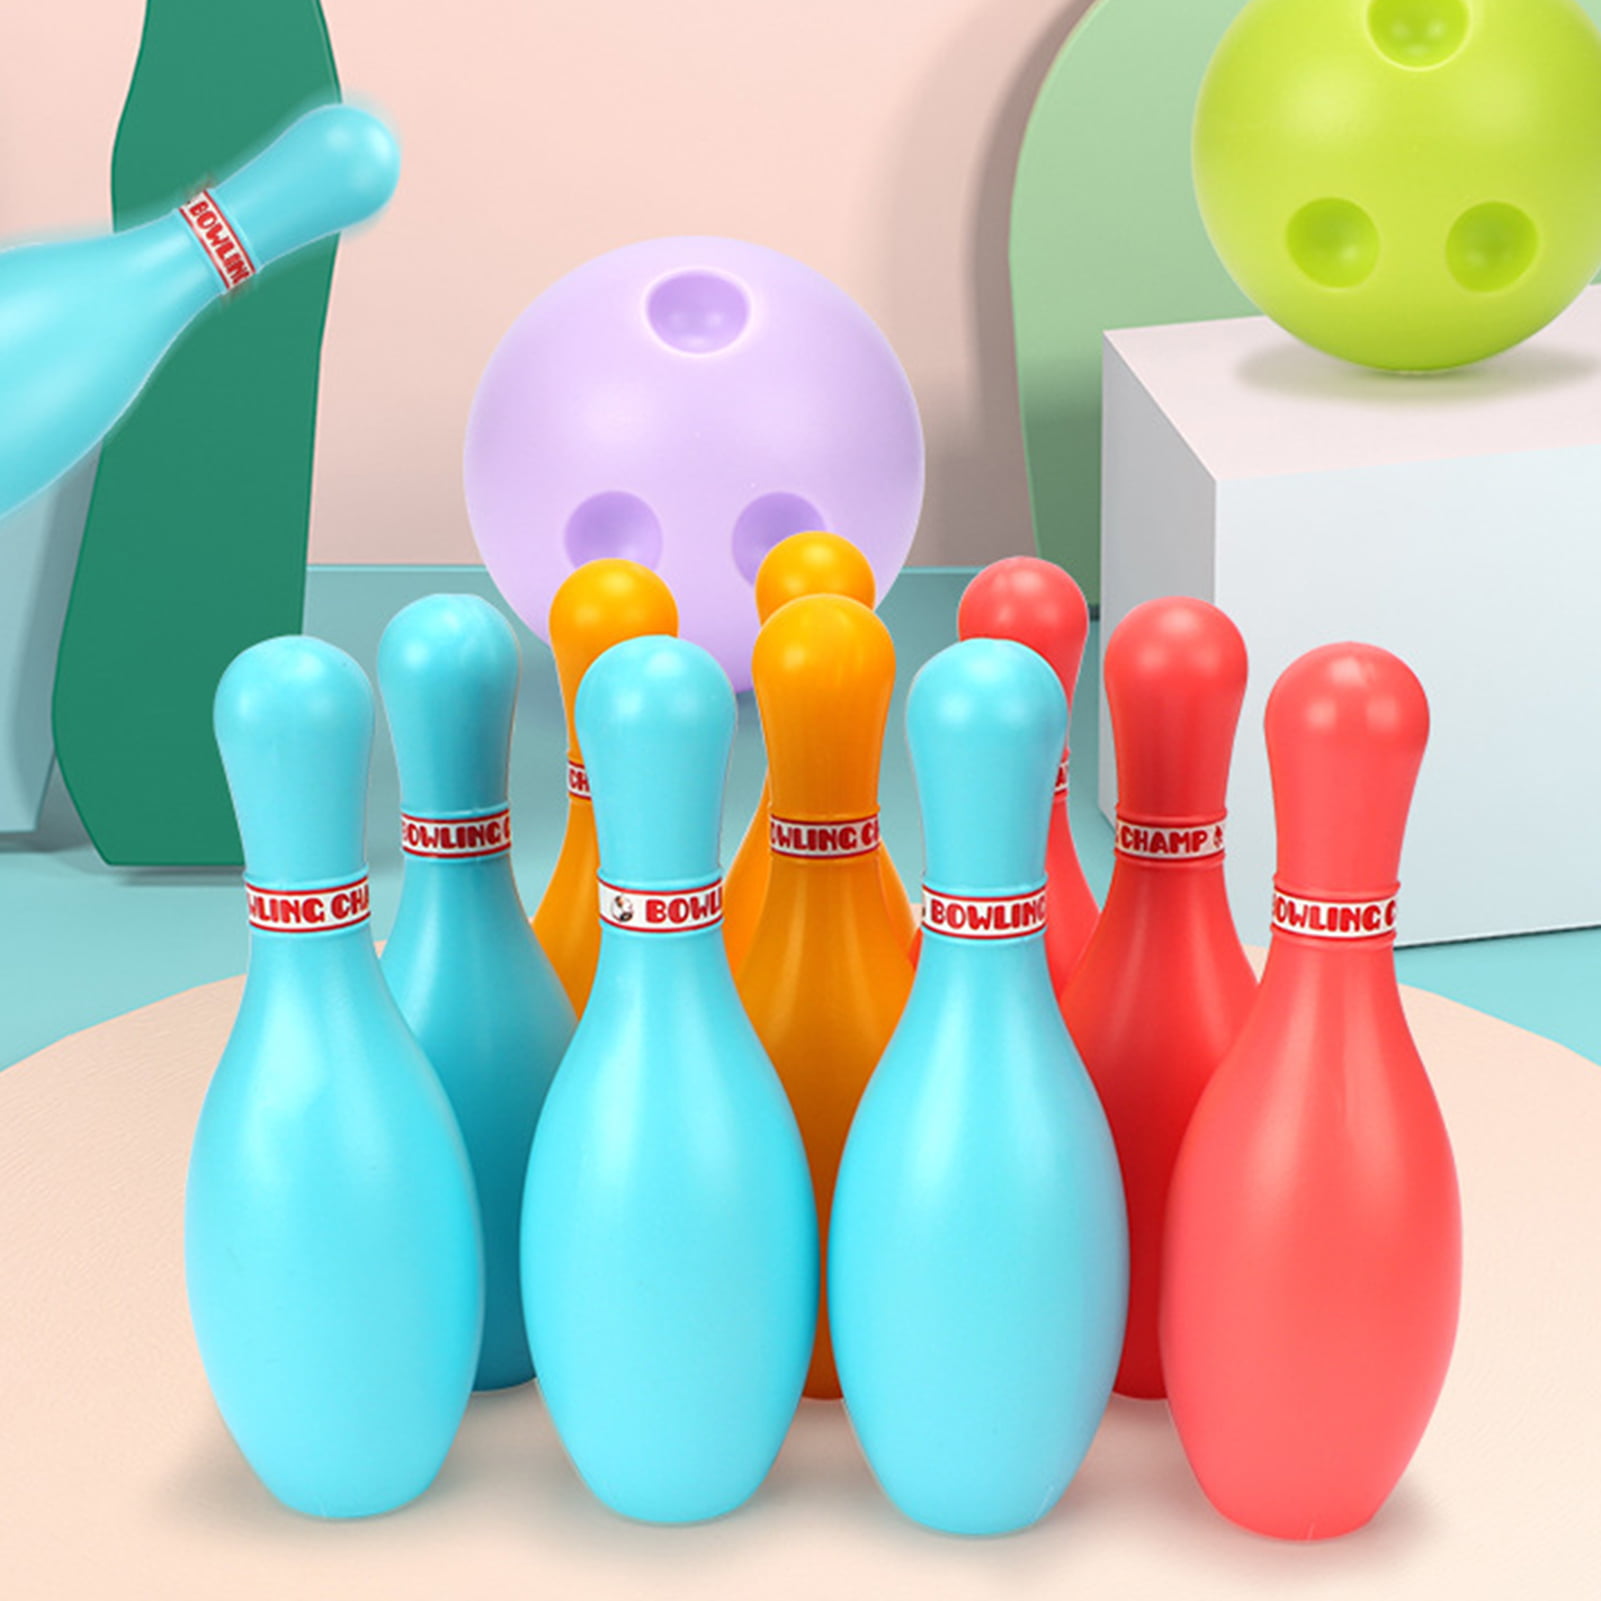 Toddmomy Bowling Pins Ball Toys and 2 Balls Games Plastic Bowling Set Educational Toy for Kids Toddlers Boys Girls Educational Early Development Indoor Outdoor Random Color 